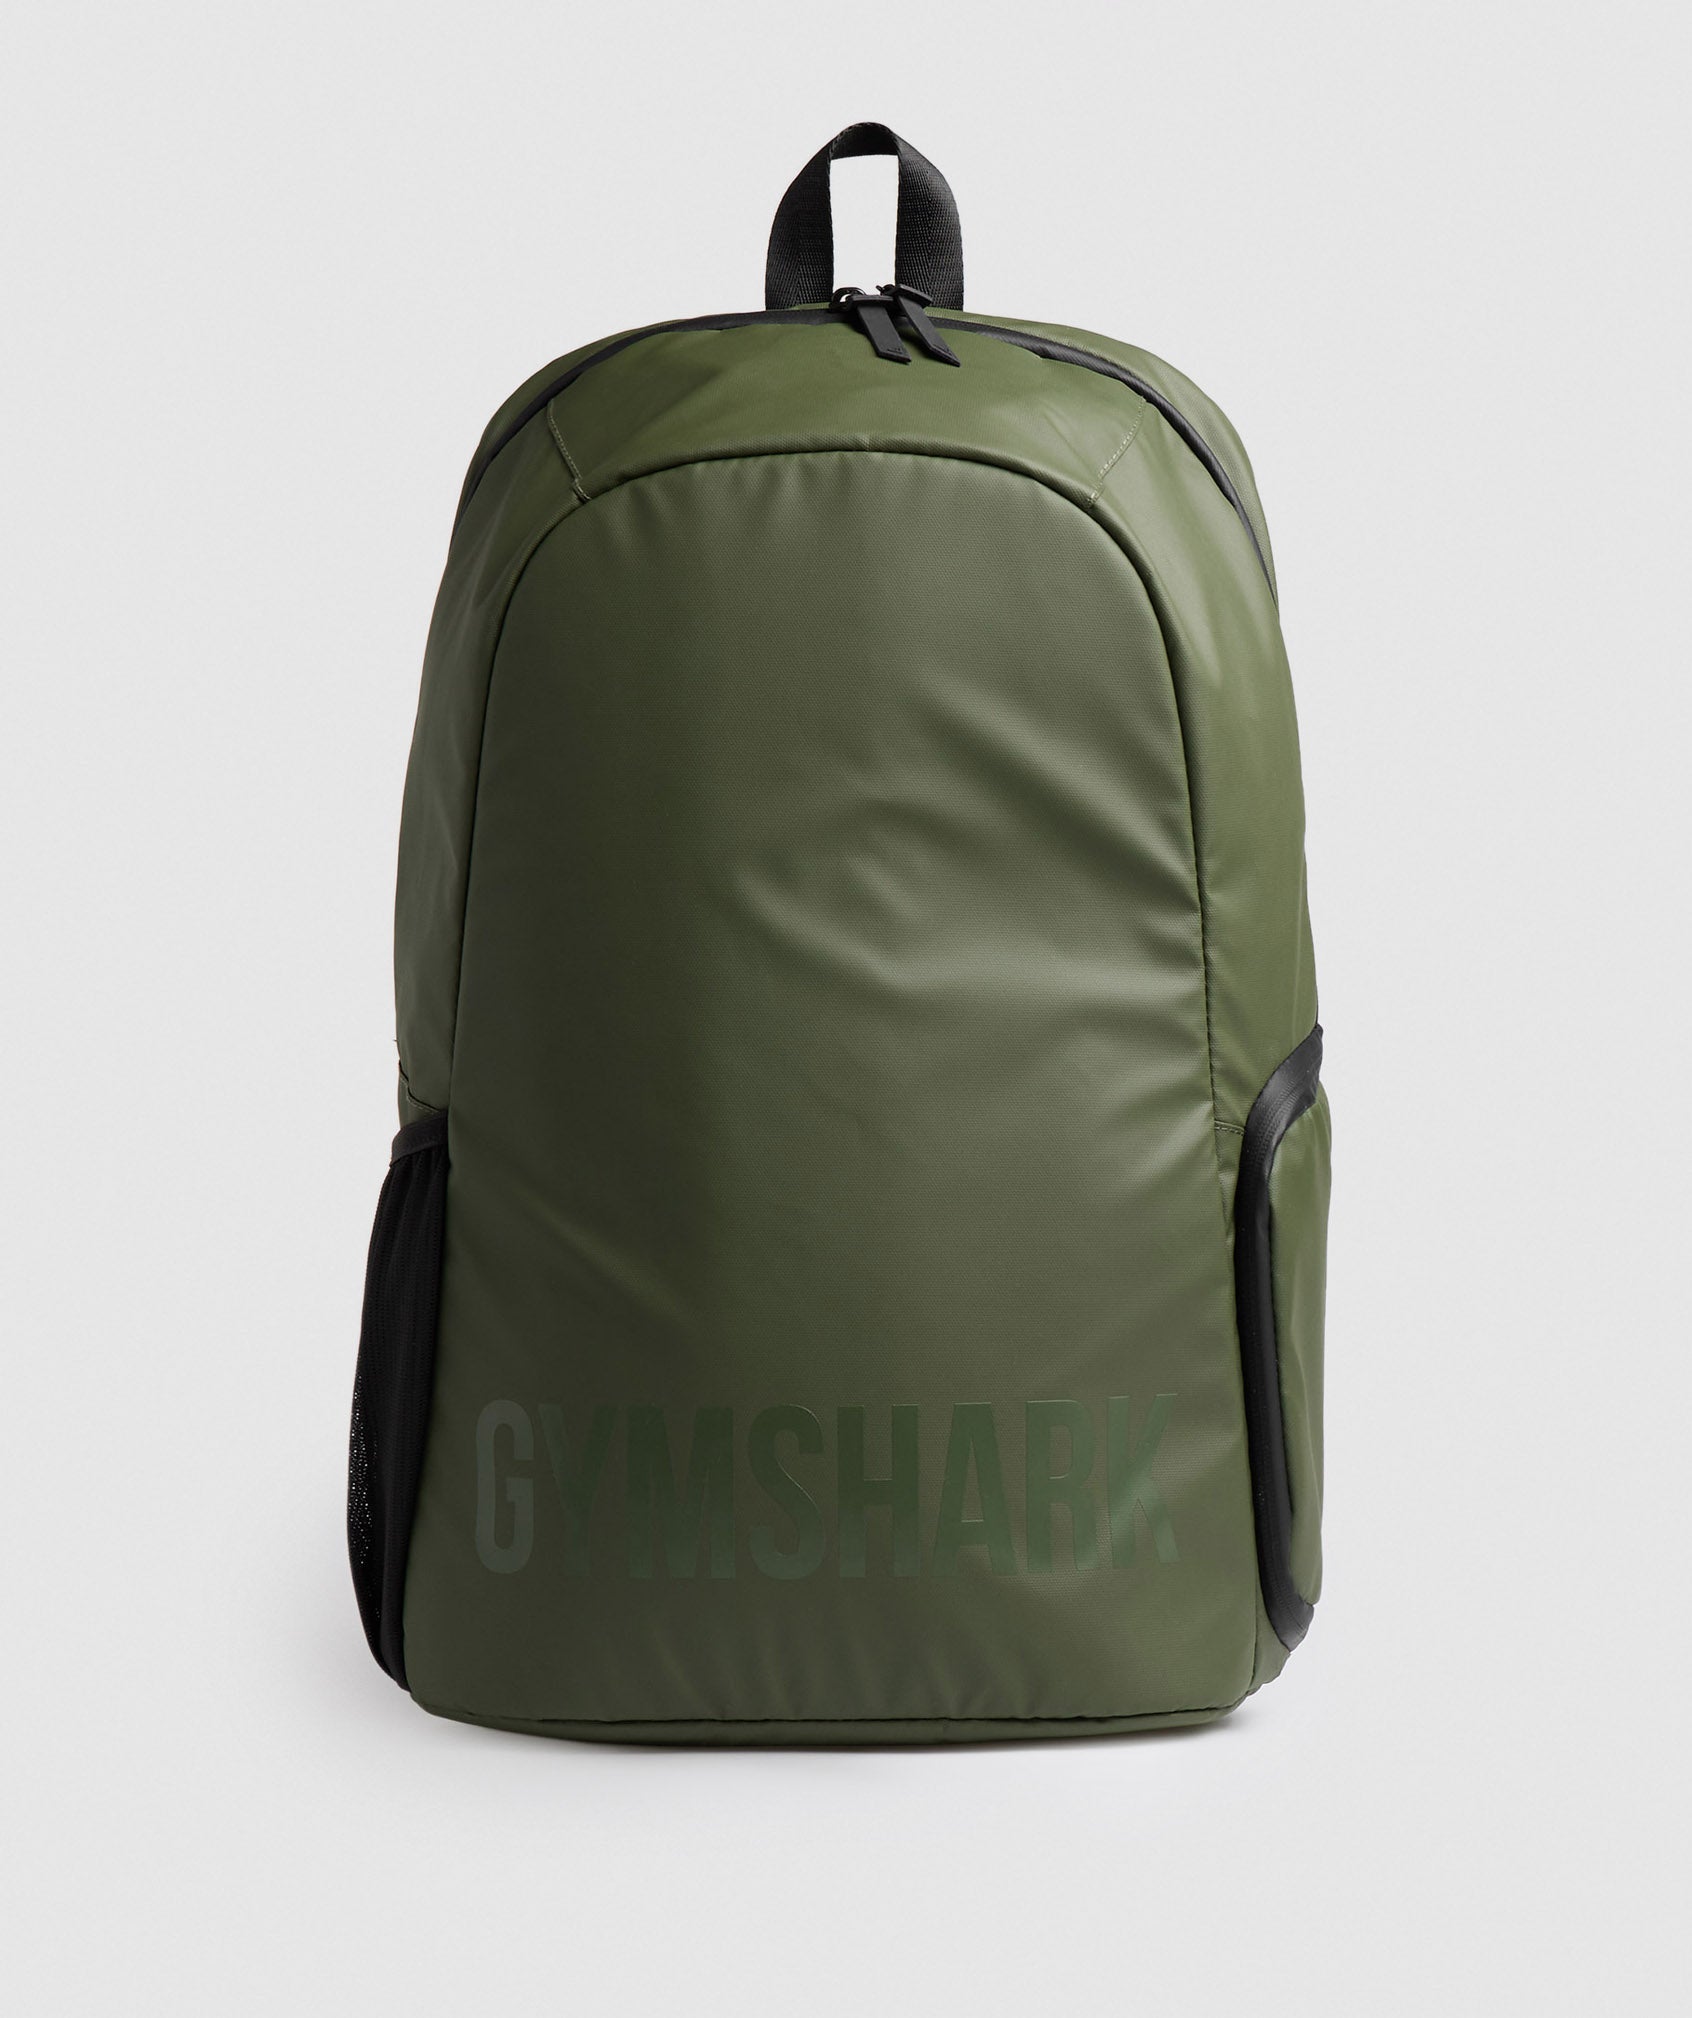 X-Series 0.1 Backpack in Core Olive/Black - view 1